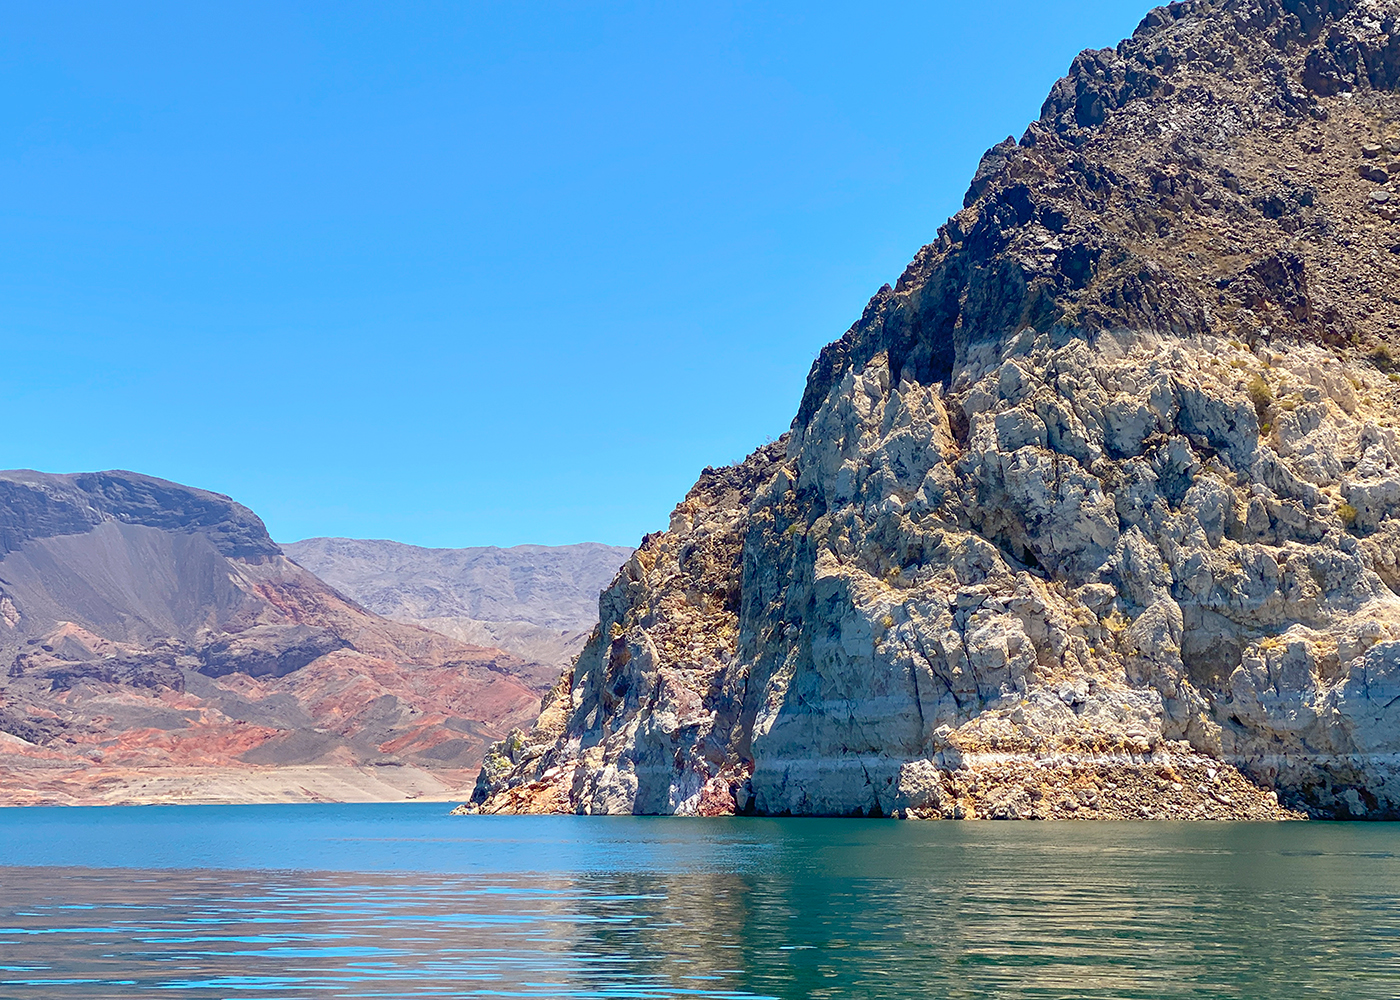 Lake Mead on the Colorado River